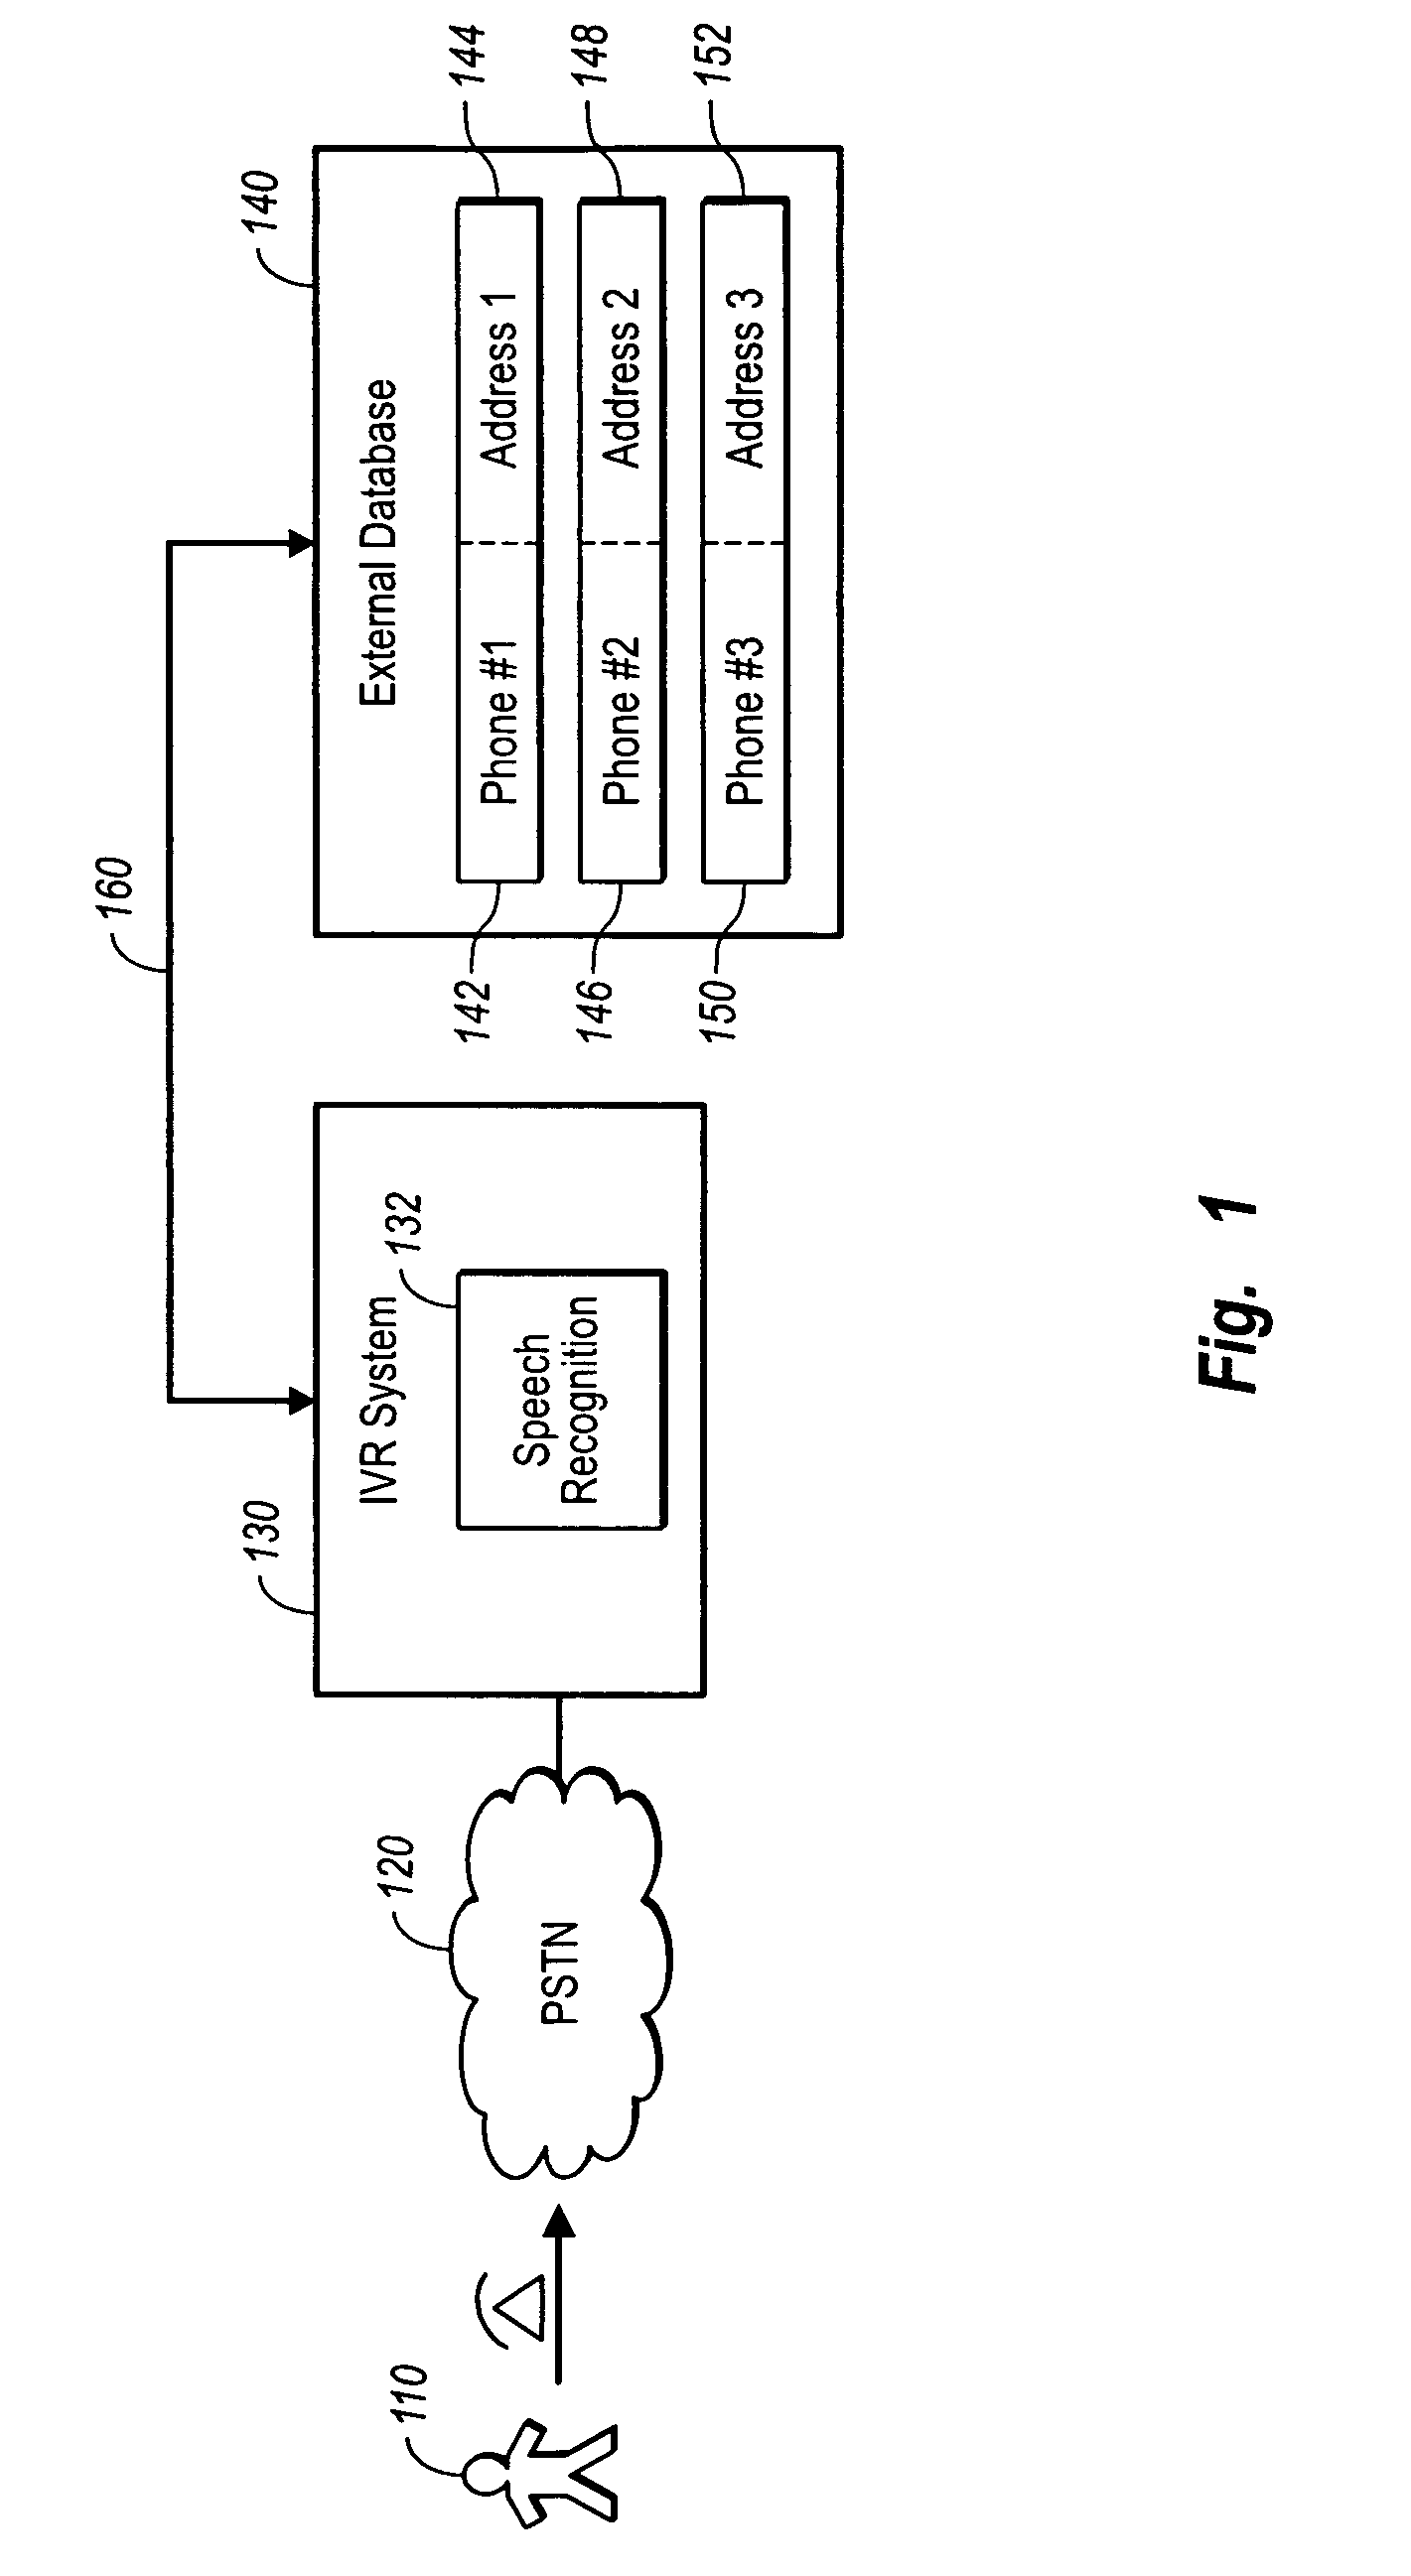 Methods for obtaining complex data in an interactive voice response system